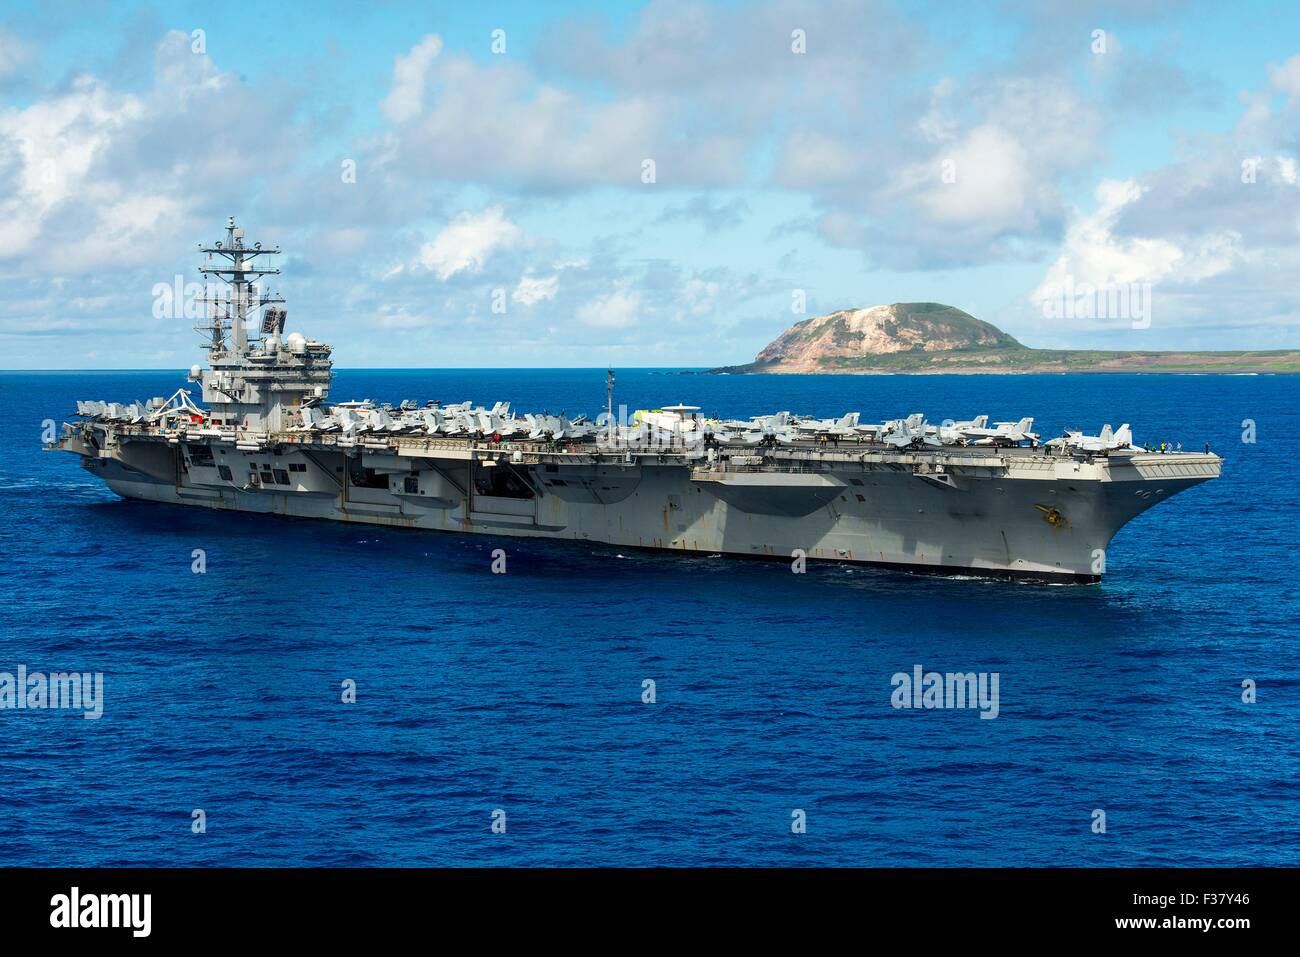 US Navy Nimitz-class nuclear aircraft carrier USS Ronald Reagan pauses to honor fallen service members from the Battle of Iwo Jima while underway off the island of Iwo To, formerly known as Iwo Jima September 29, 2015 in the Pacific Ocean.  This year marks the 70th anniversary of the end of World War II. Stock Photo